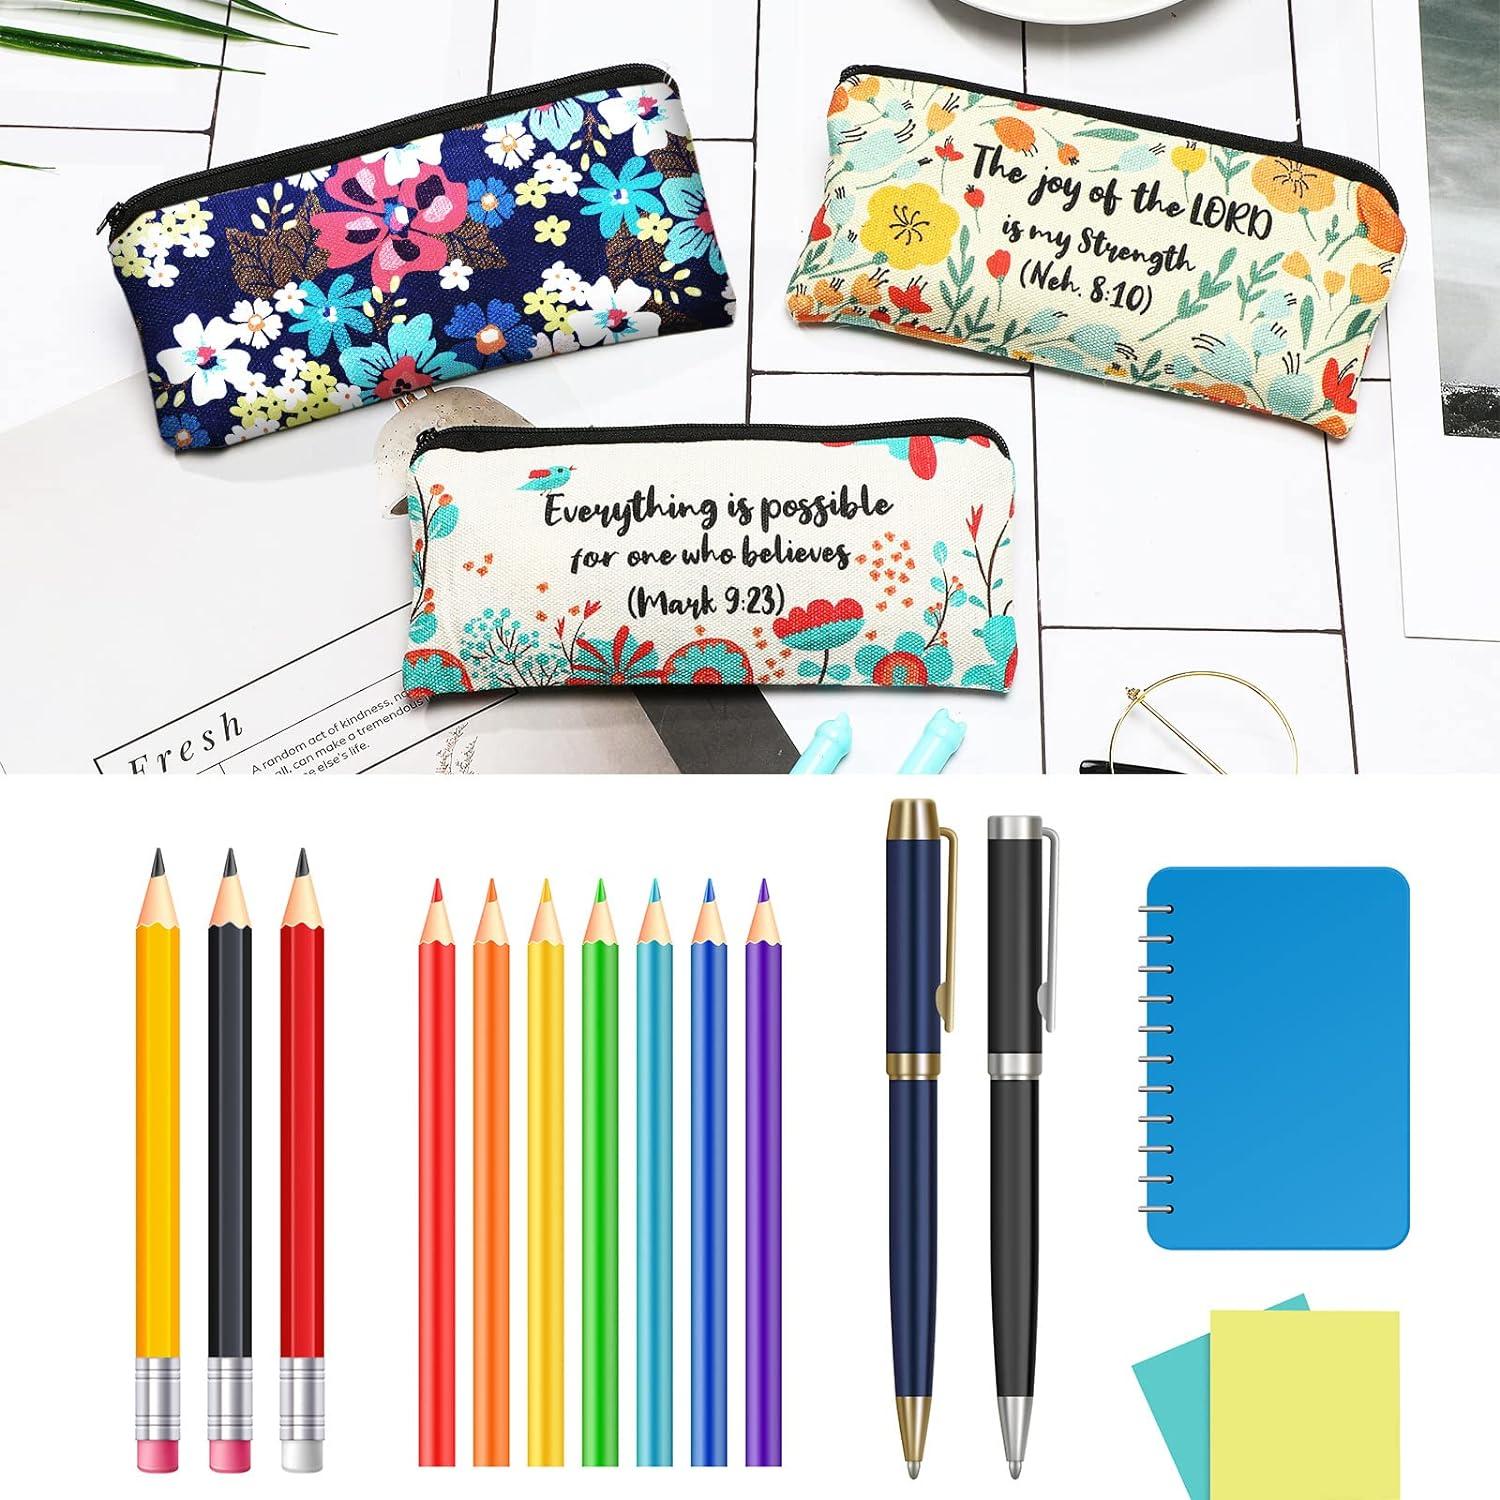 4 Pieces Inspirational Bible Verse Pencil Pouch Christian Pencil Case  Scripture Makeup Bags Canvas Cosmetic Bags for Students Office Journaling  Supplies (Bible Verse Pattern 7.8 x 3.8 Inch) 7.8 x 3.8 Inch Bible Verse  Pattern